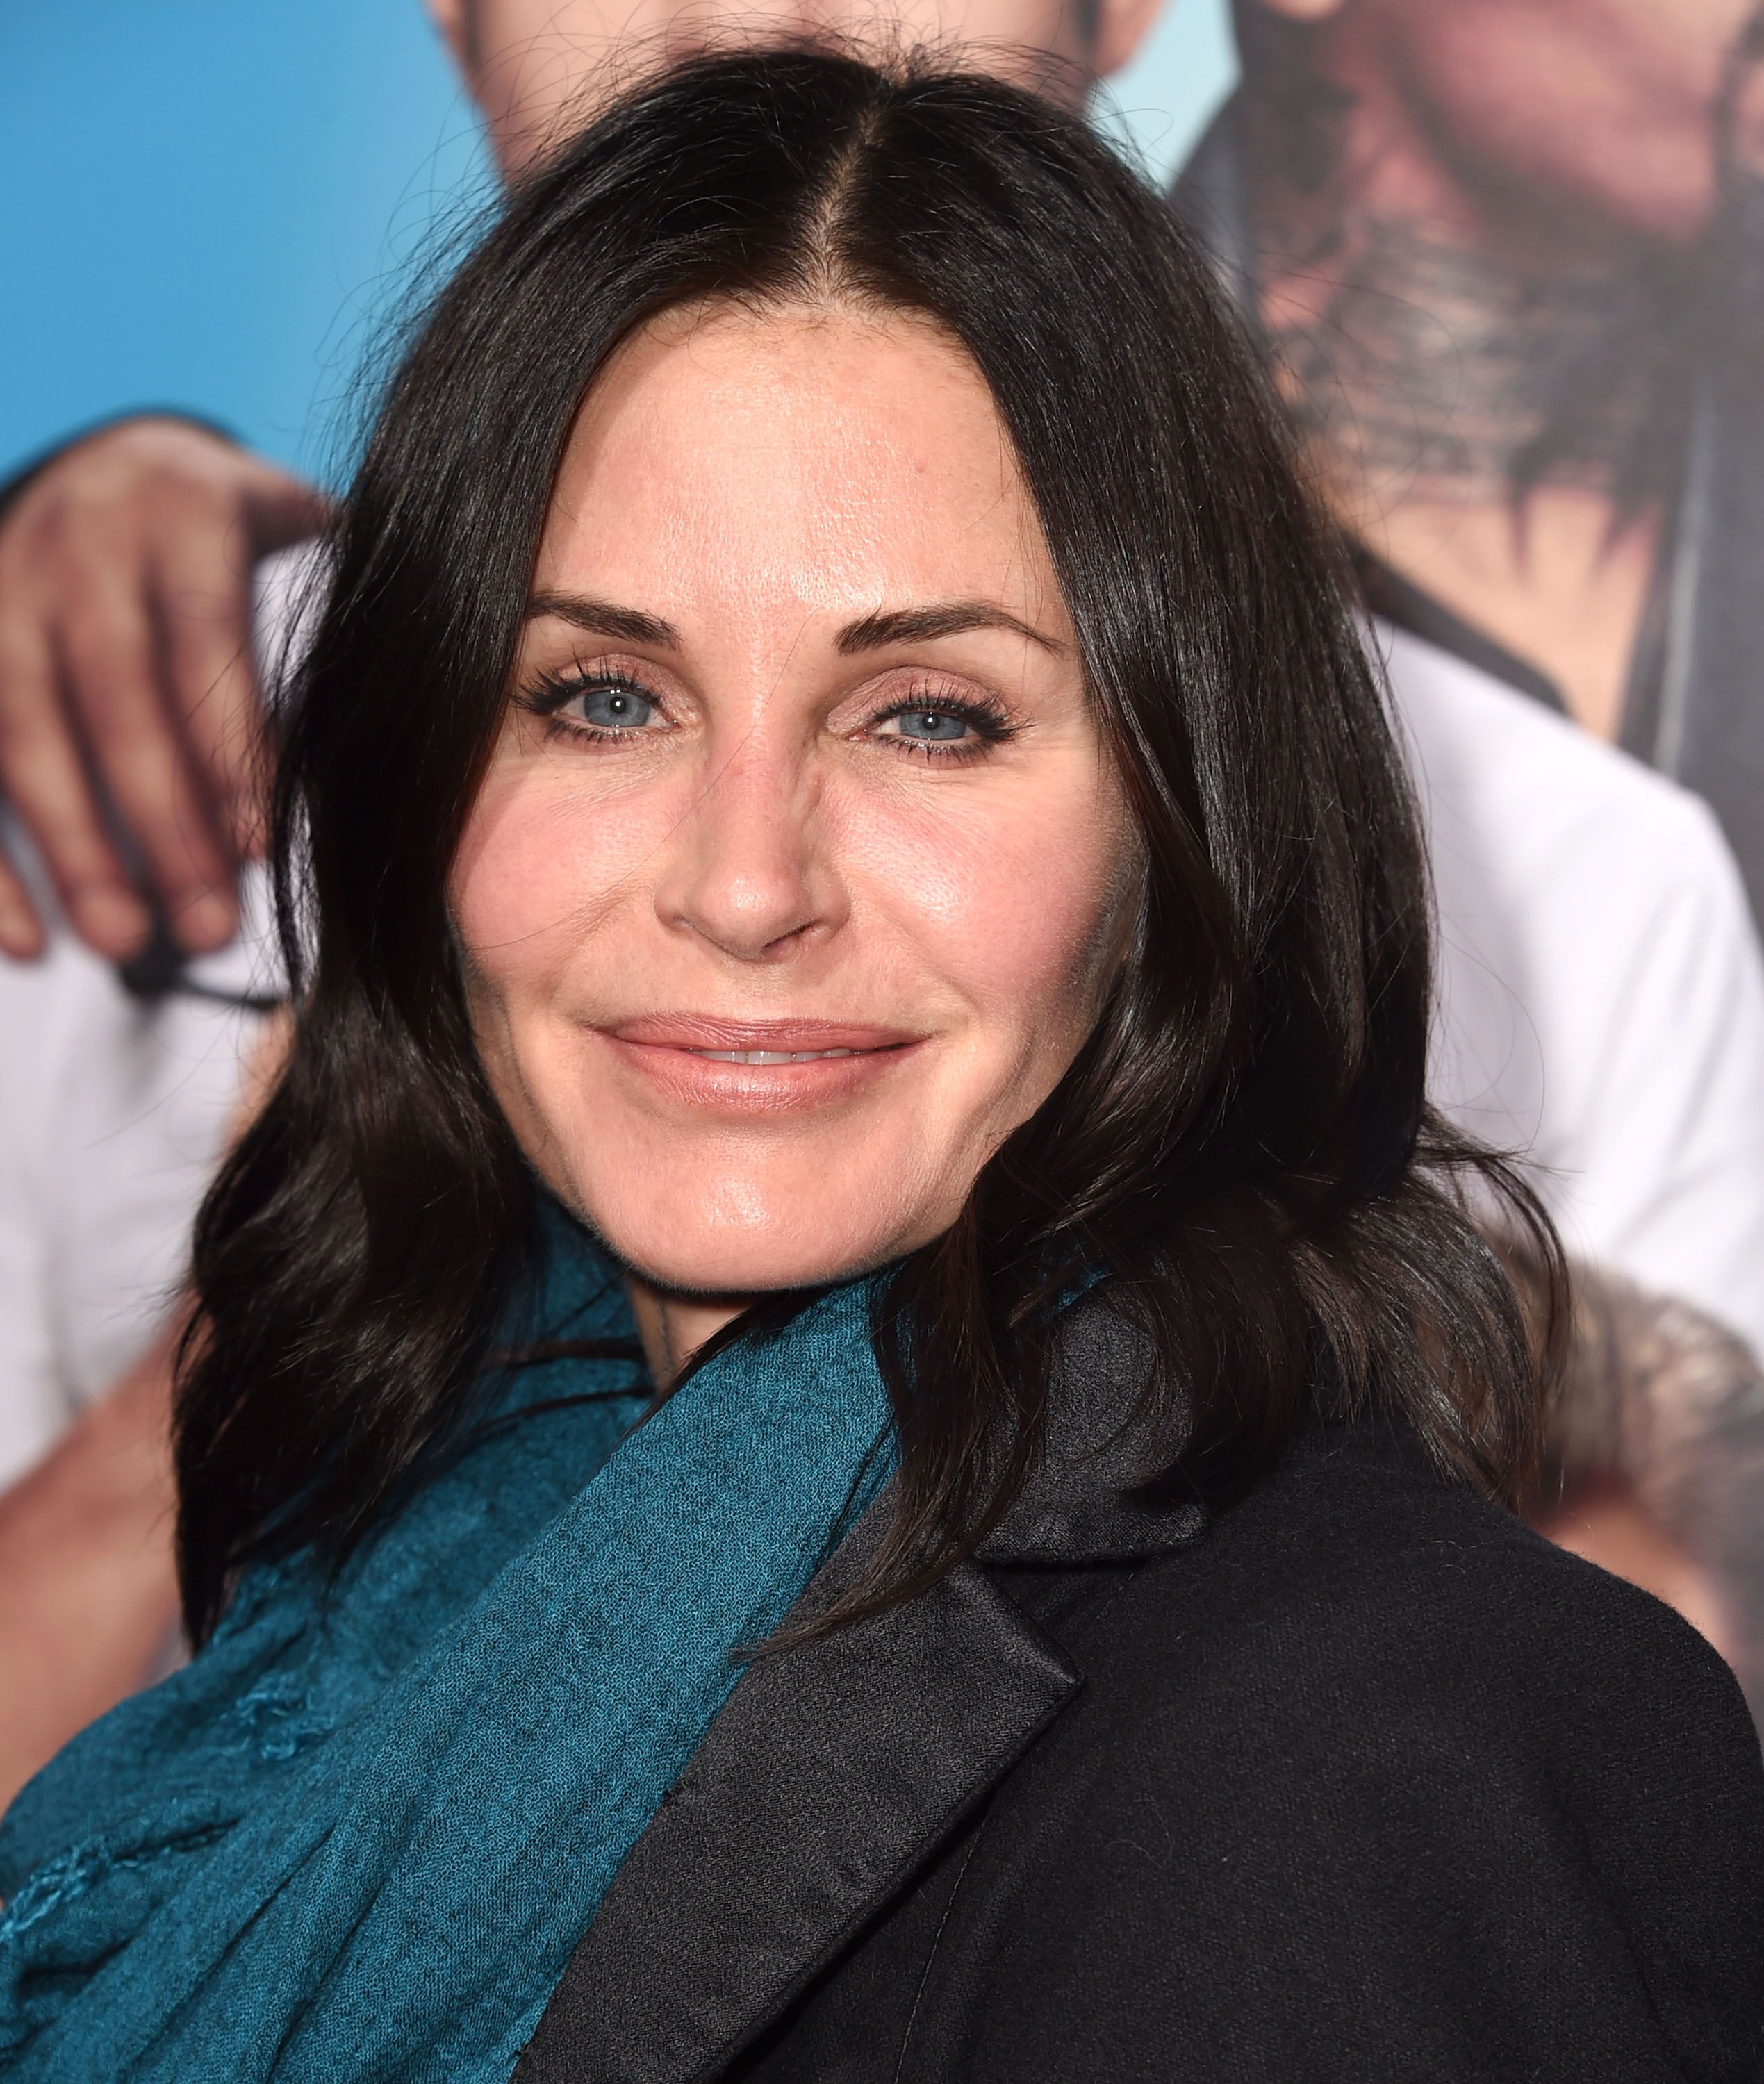 Courteney Cox during the "Horrible Bosses 2" - Los Angeles Premiereat TCL Chinese Theatre on November 20, 2014, in Hollywood, California. | Source: Getty Images